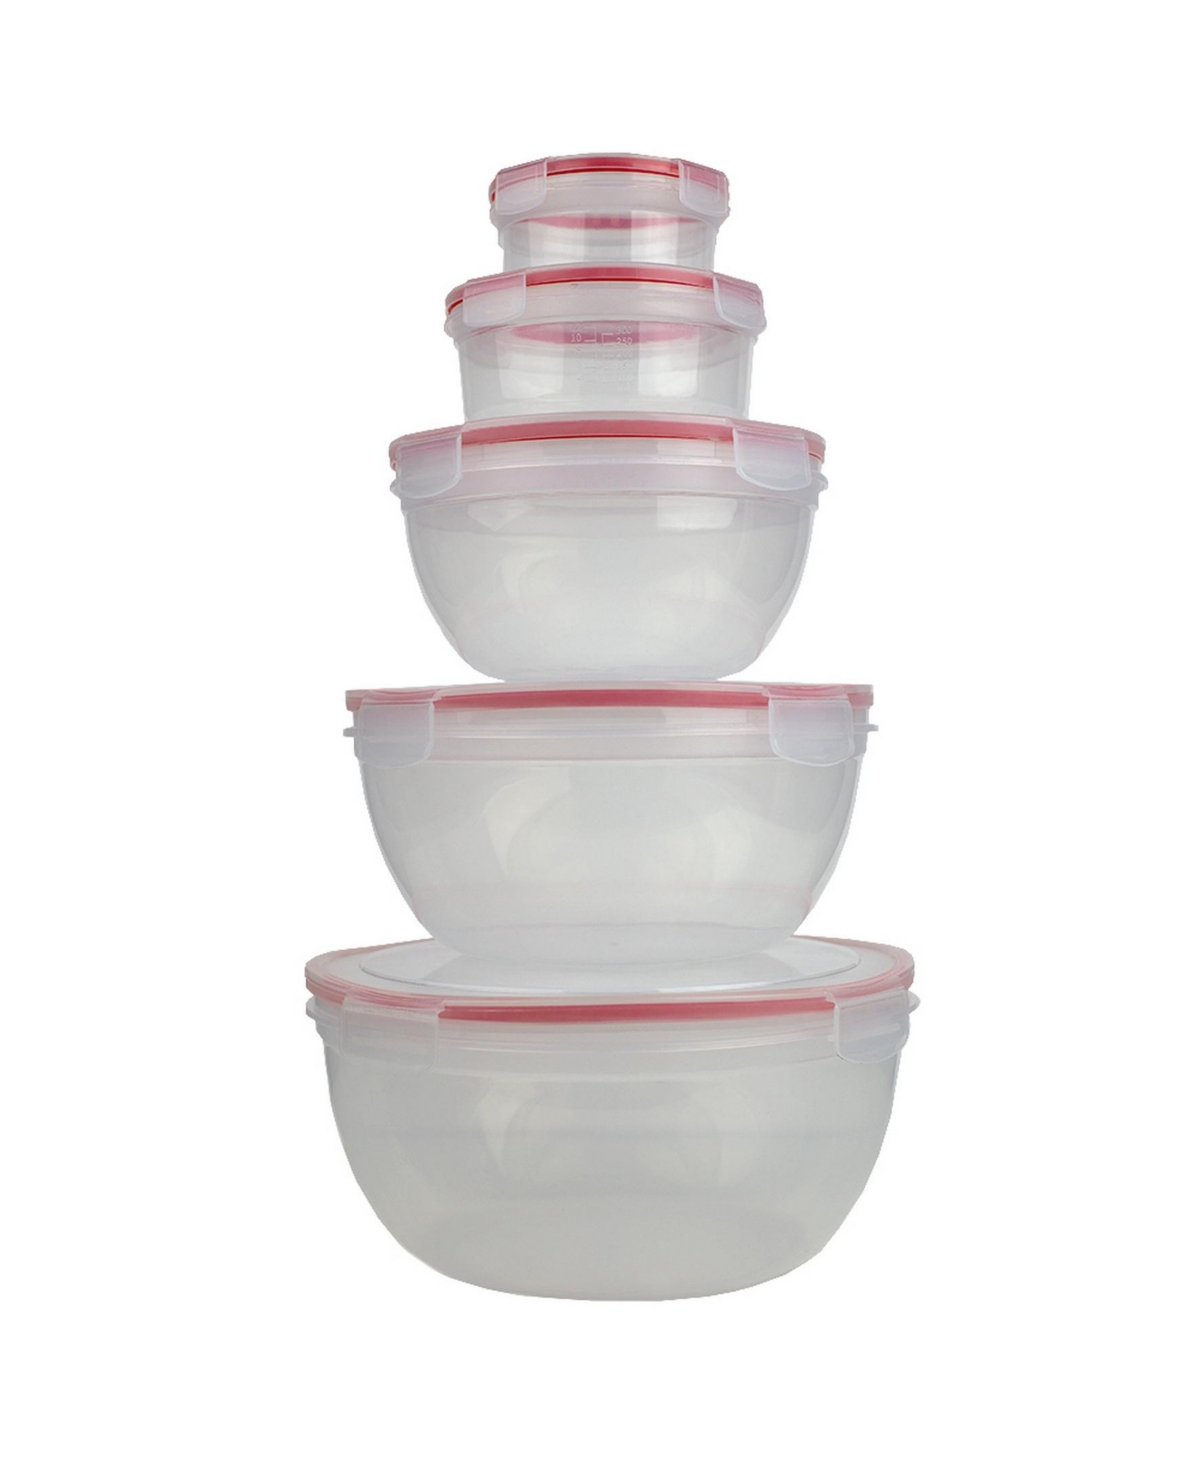 Hds Trading Locking Round Food Storage Containers with Snap-On Lids - 10 Piece